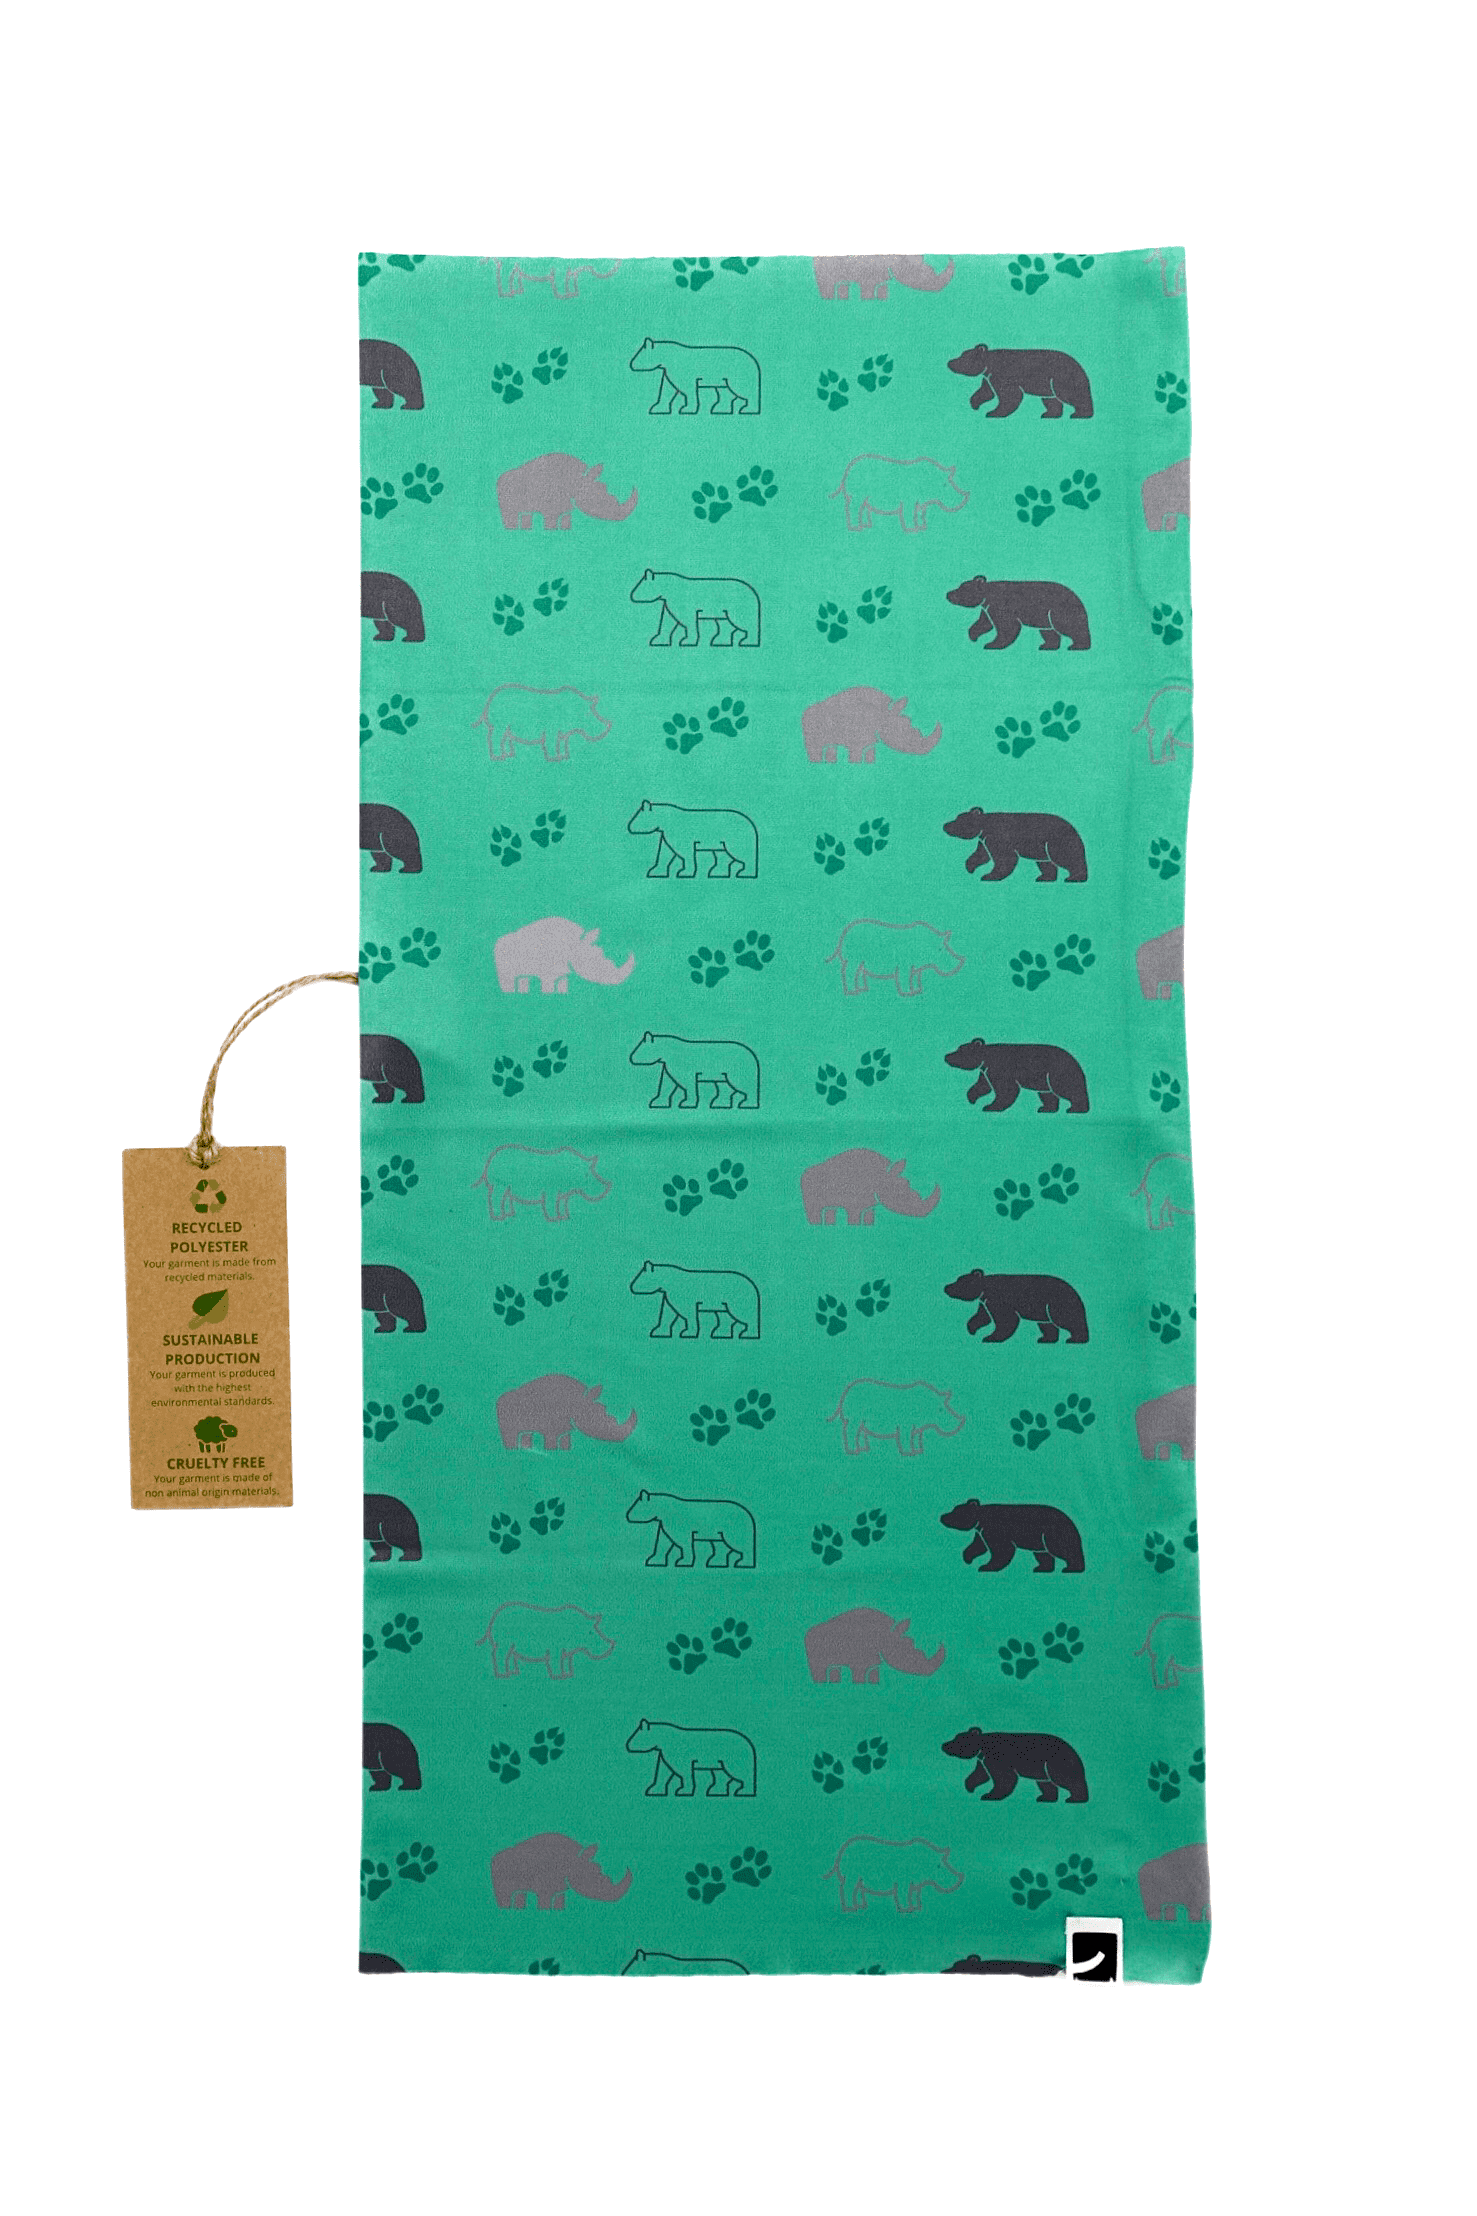 This is a unisex, multifunctional and sustainable bandana with animal print of bears and rhinoceros. It is made from recycled polyester which is breathable, durable, soft to touch, easy to care and fast drying material. It makes it perfectly suitable for all kinds of sports like biking, hiking, jogging or skiing. This is a versatile bandana that can be used as a scarf, face mask, bandana or headband and it is also known as tube scarf, neck gaiter or face mask. It is a vegan product certified by PETA.